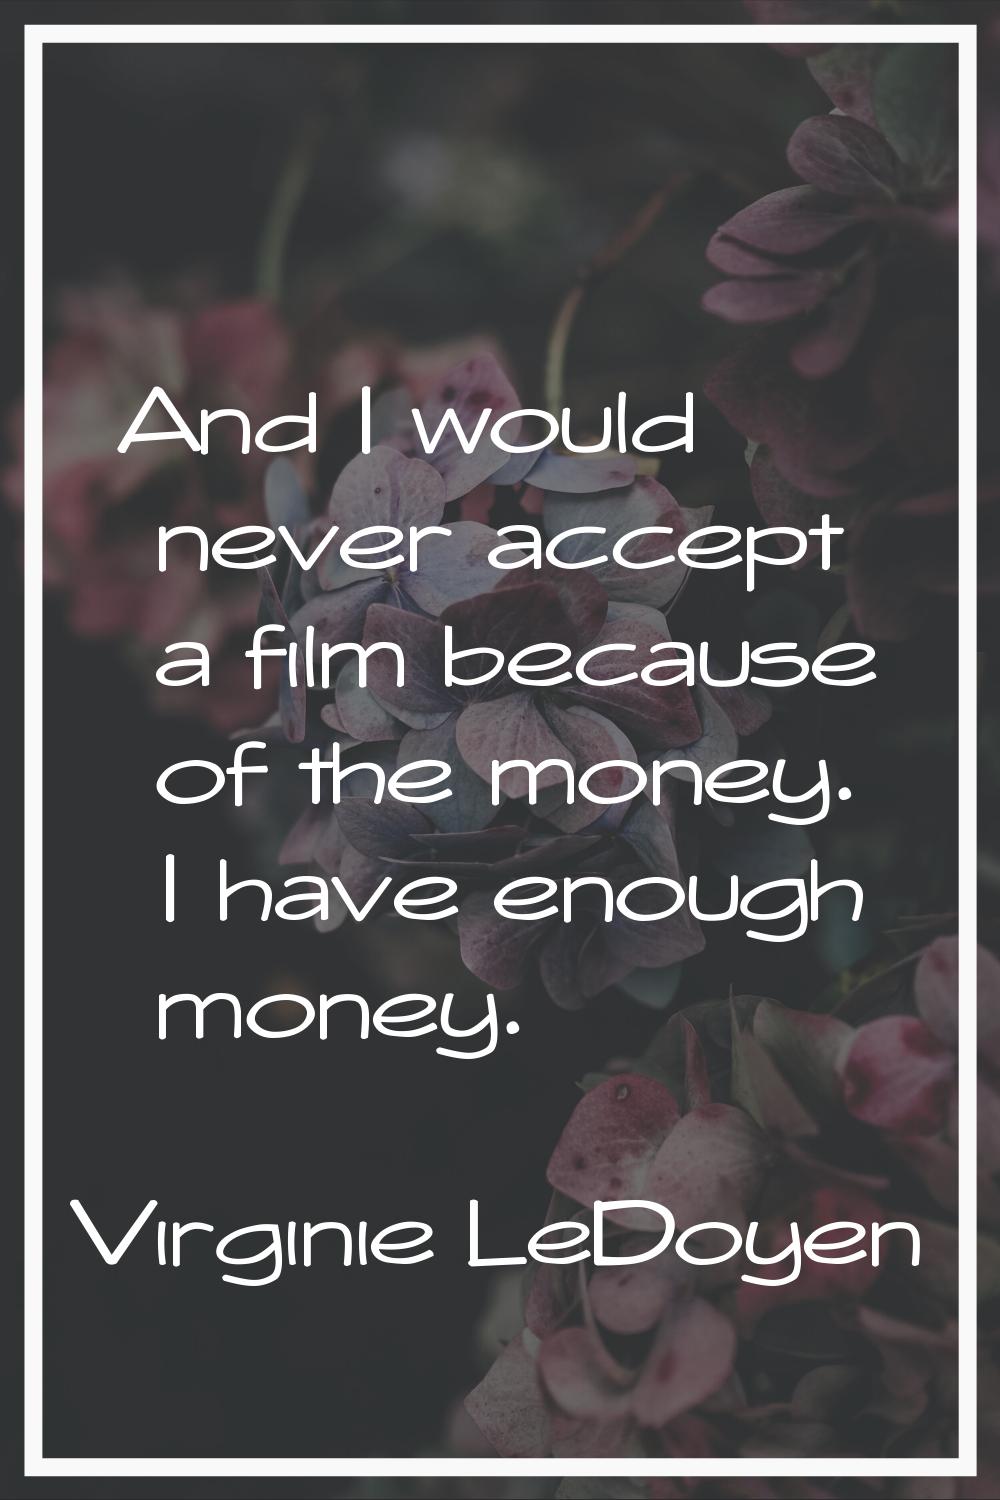 And I would never accept a film because of the money. I have enough money.